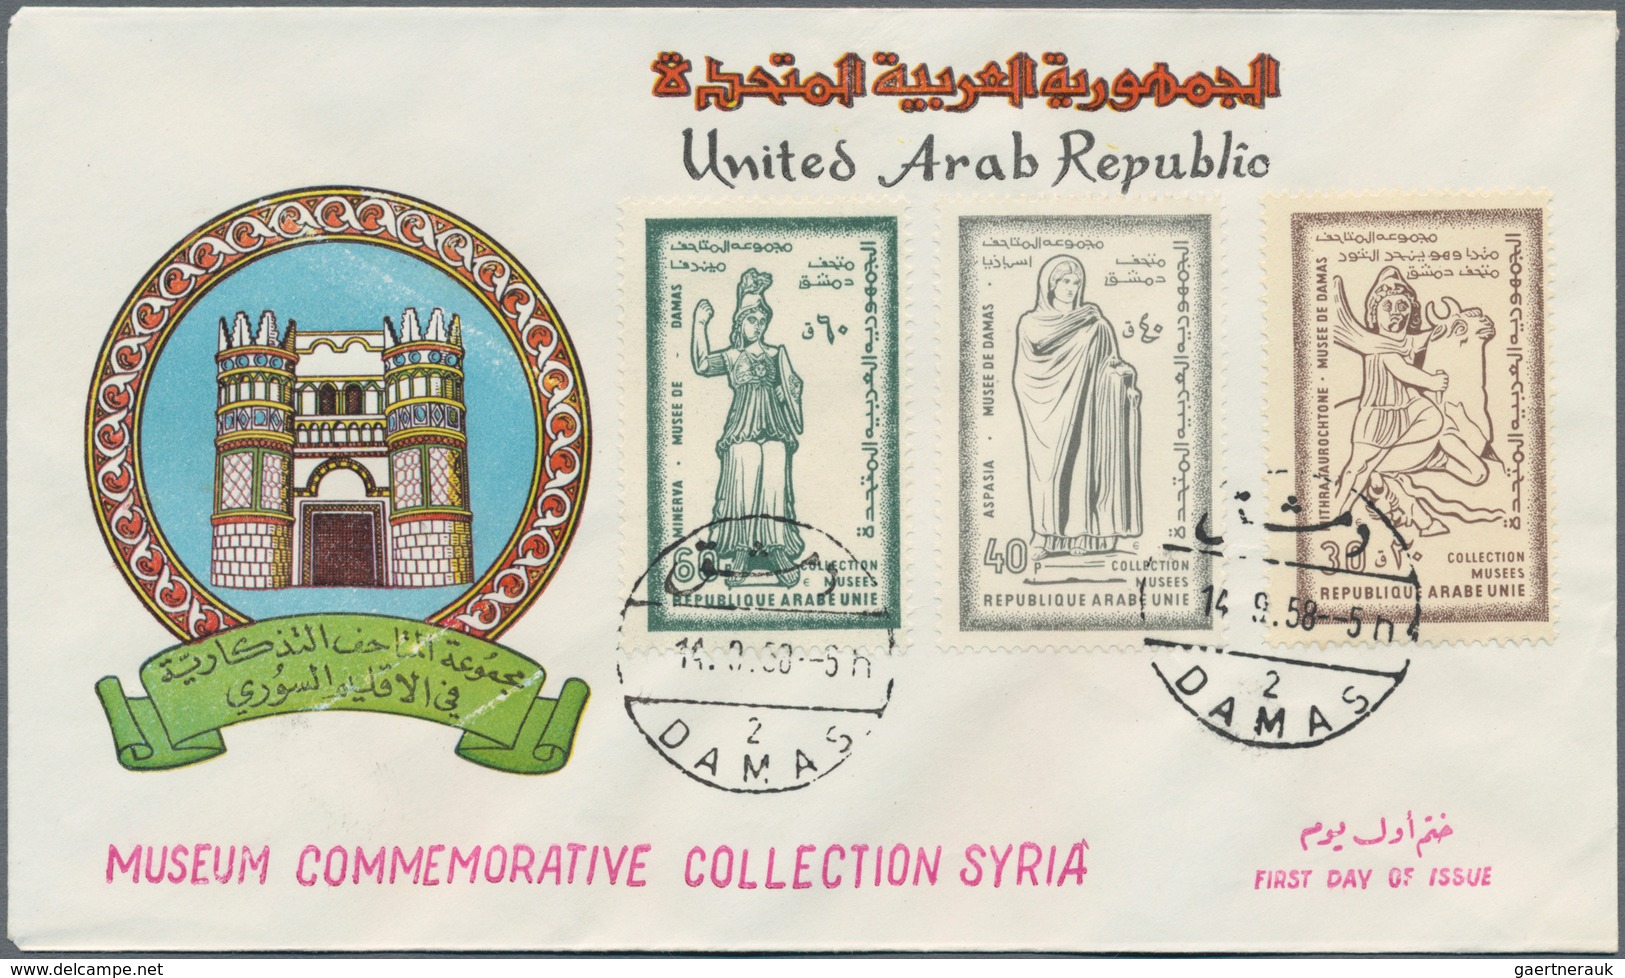 Syrien: 1958, FDCs, cpl. run of 12 sets on OFFICIAL FIRST DAY COVERS, including also the scare DAMAS